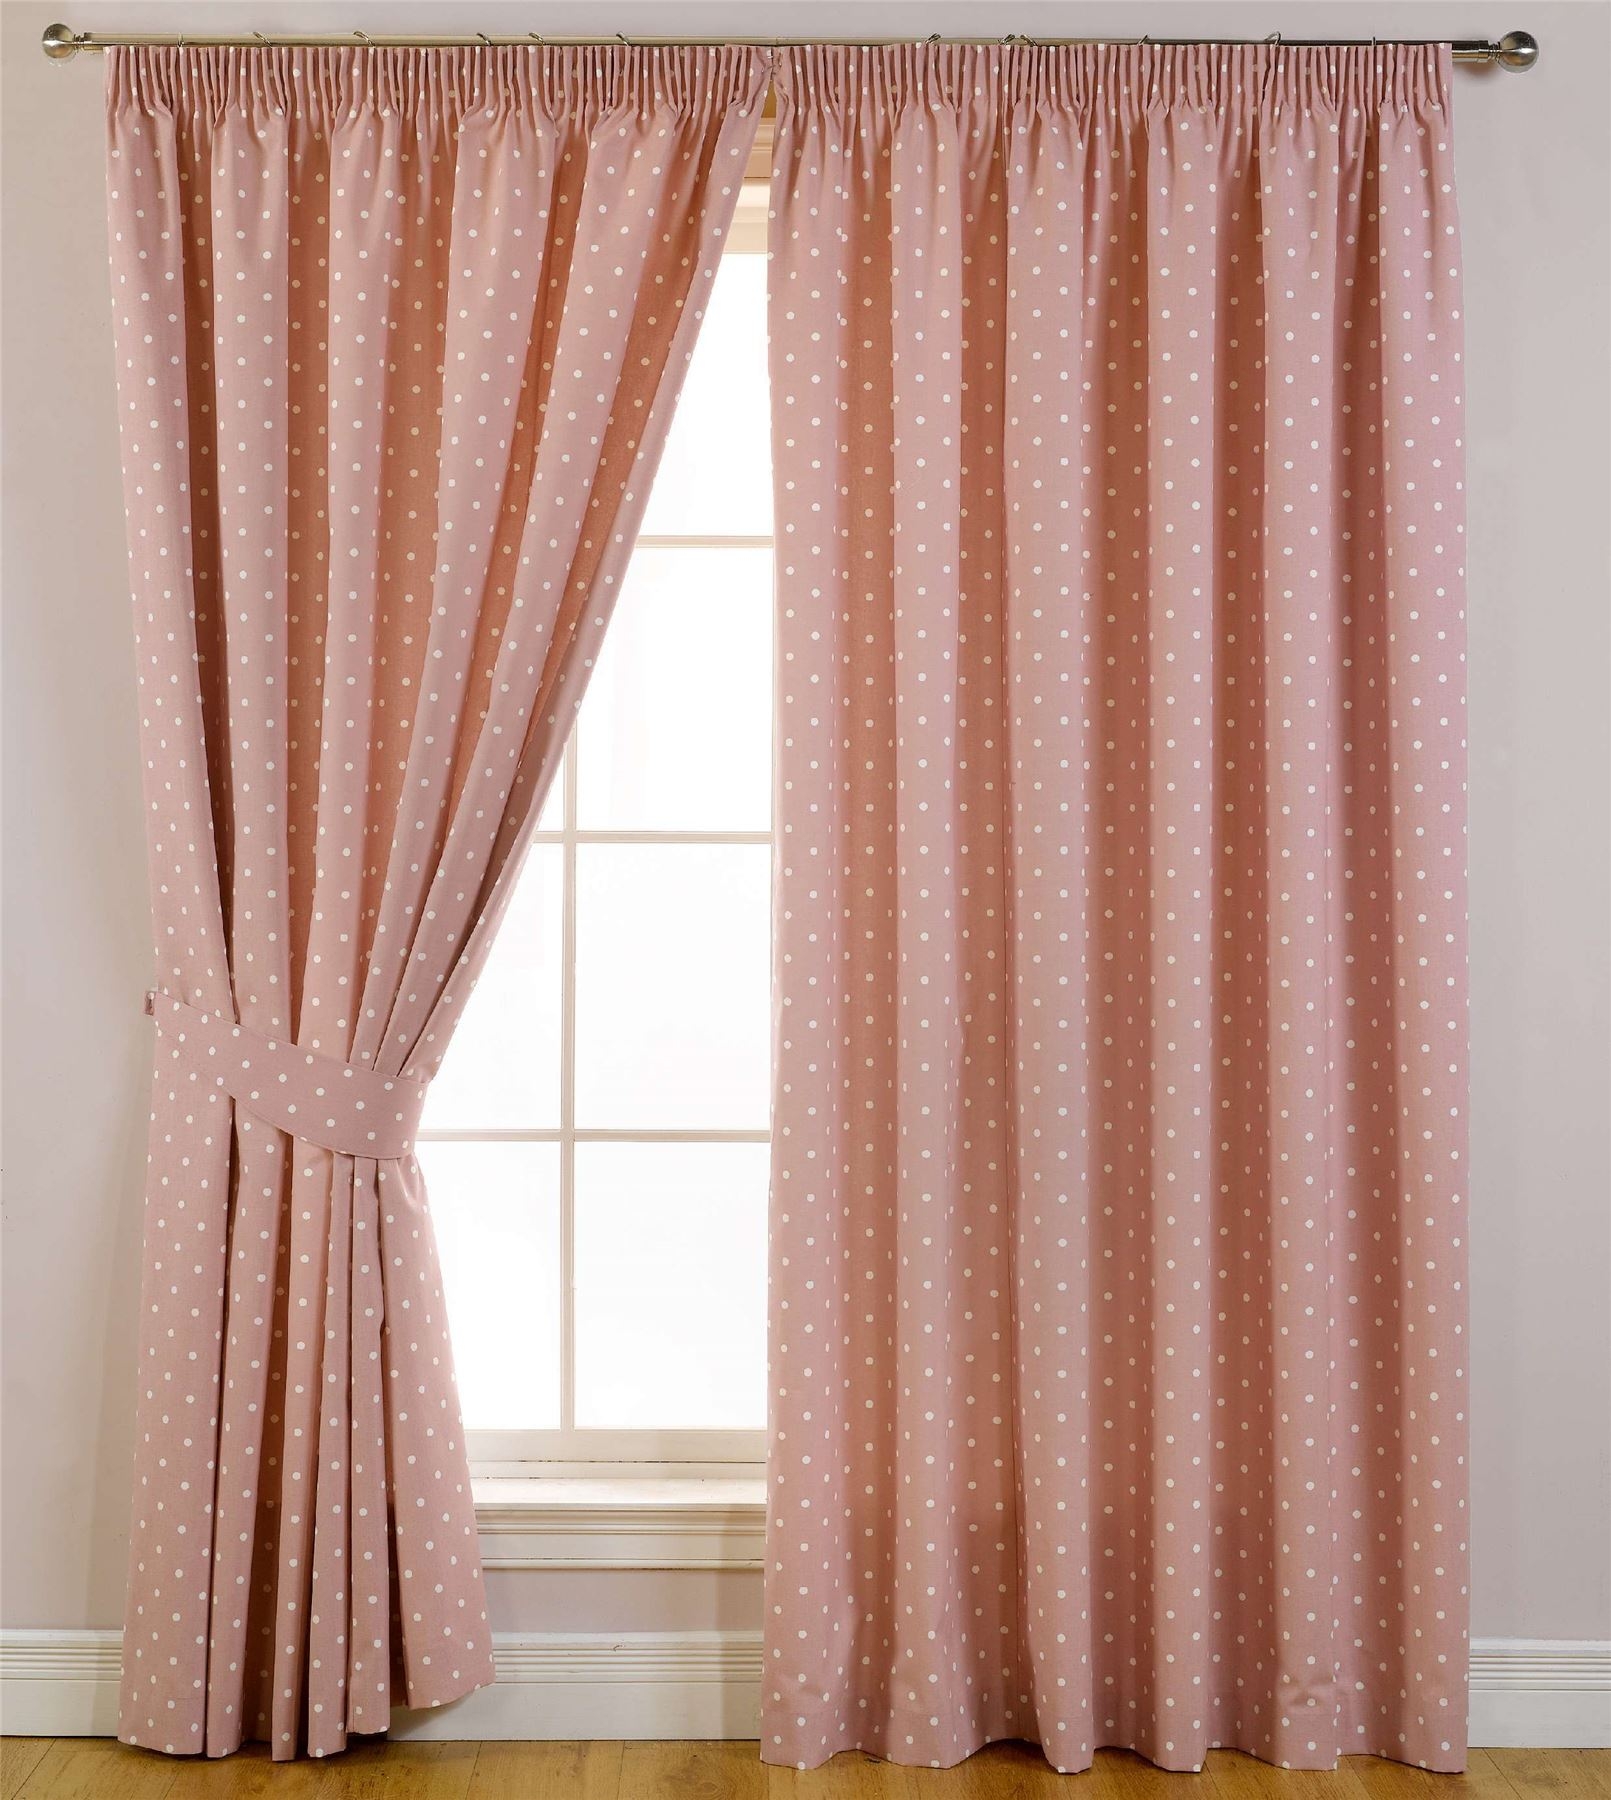 From Luxury To Budget: Curtains For Every Price Point